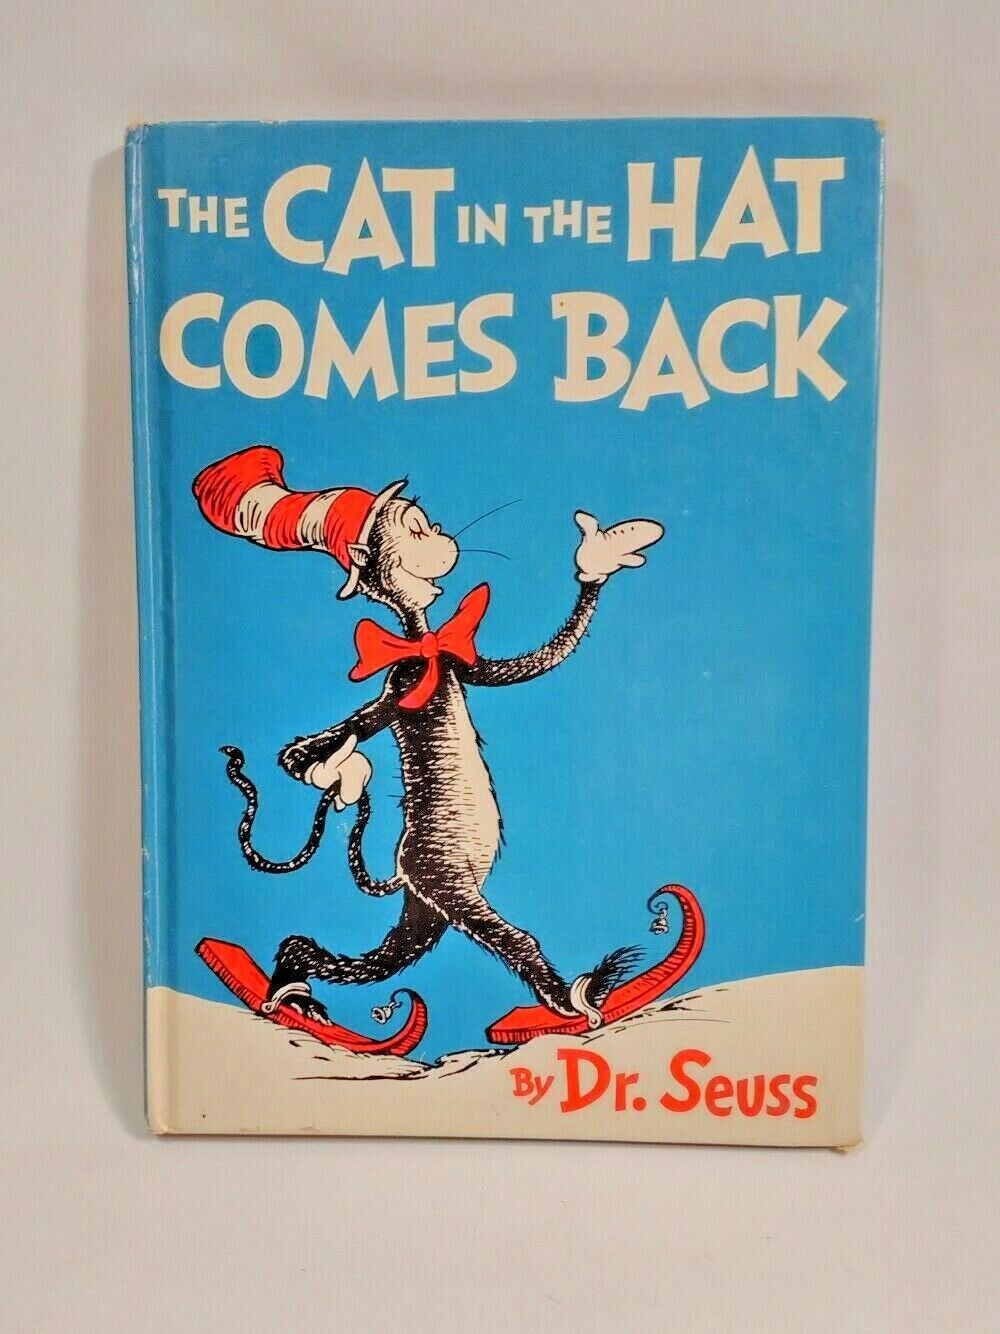 Early Edition The Cat in the Hat Comes Back by Dr. Suess Vintage 1958